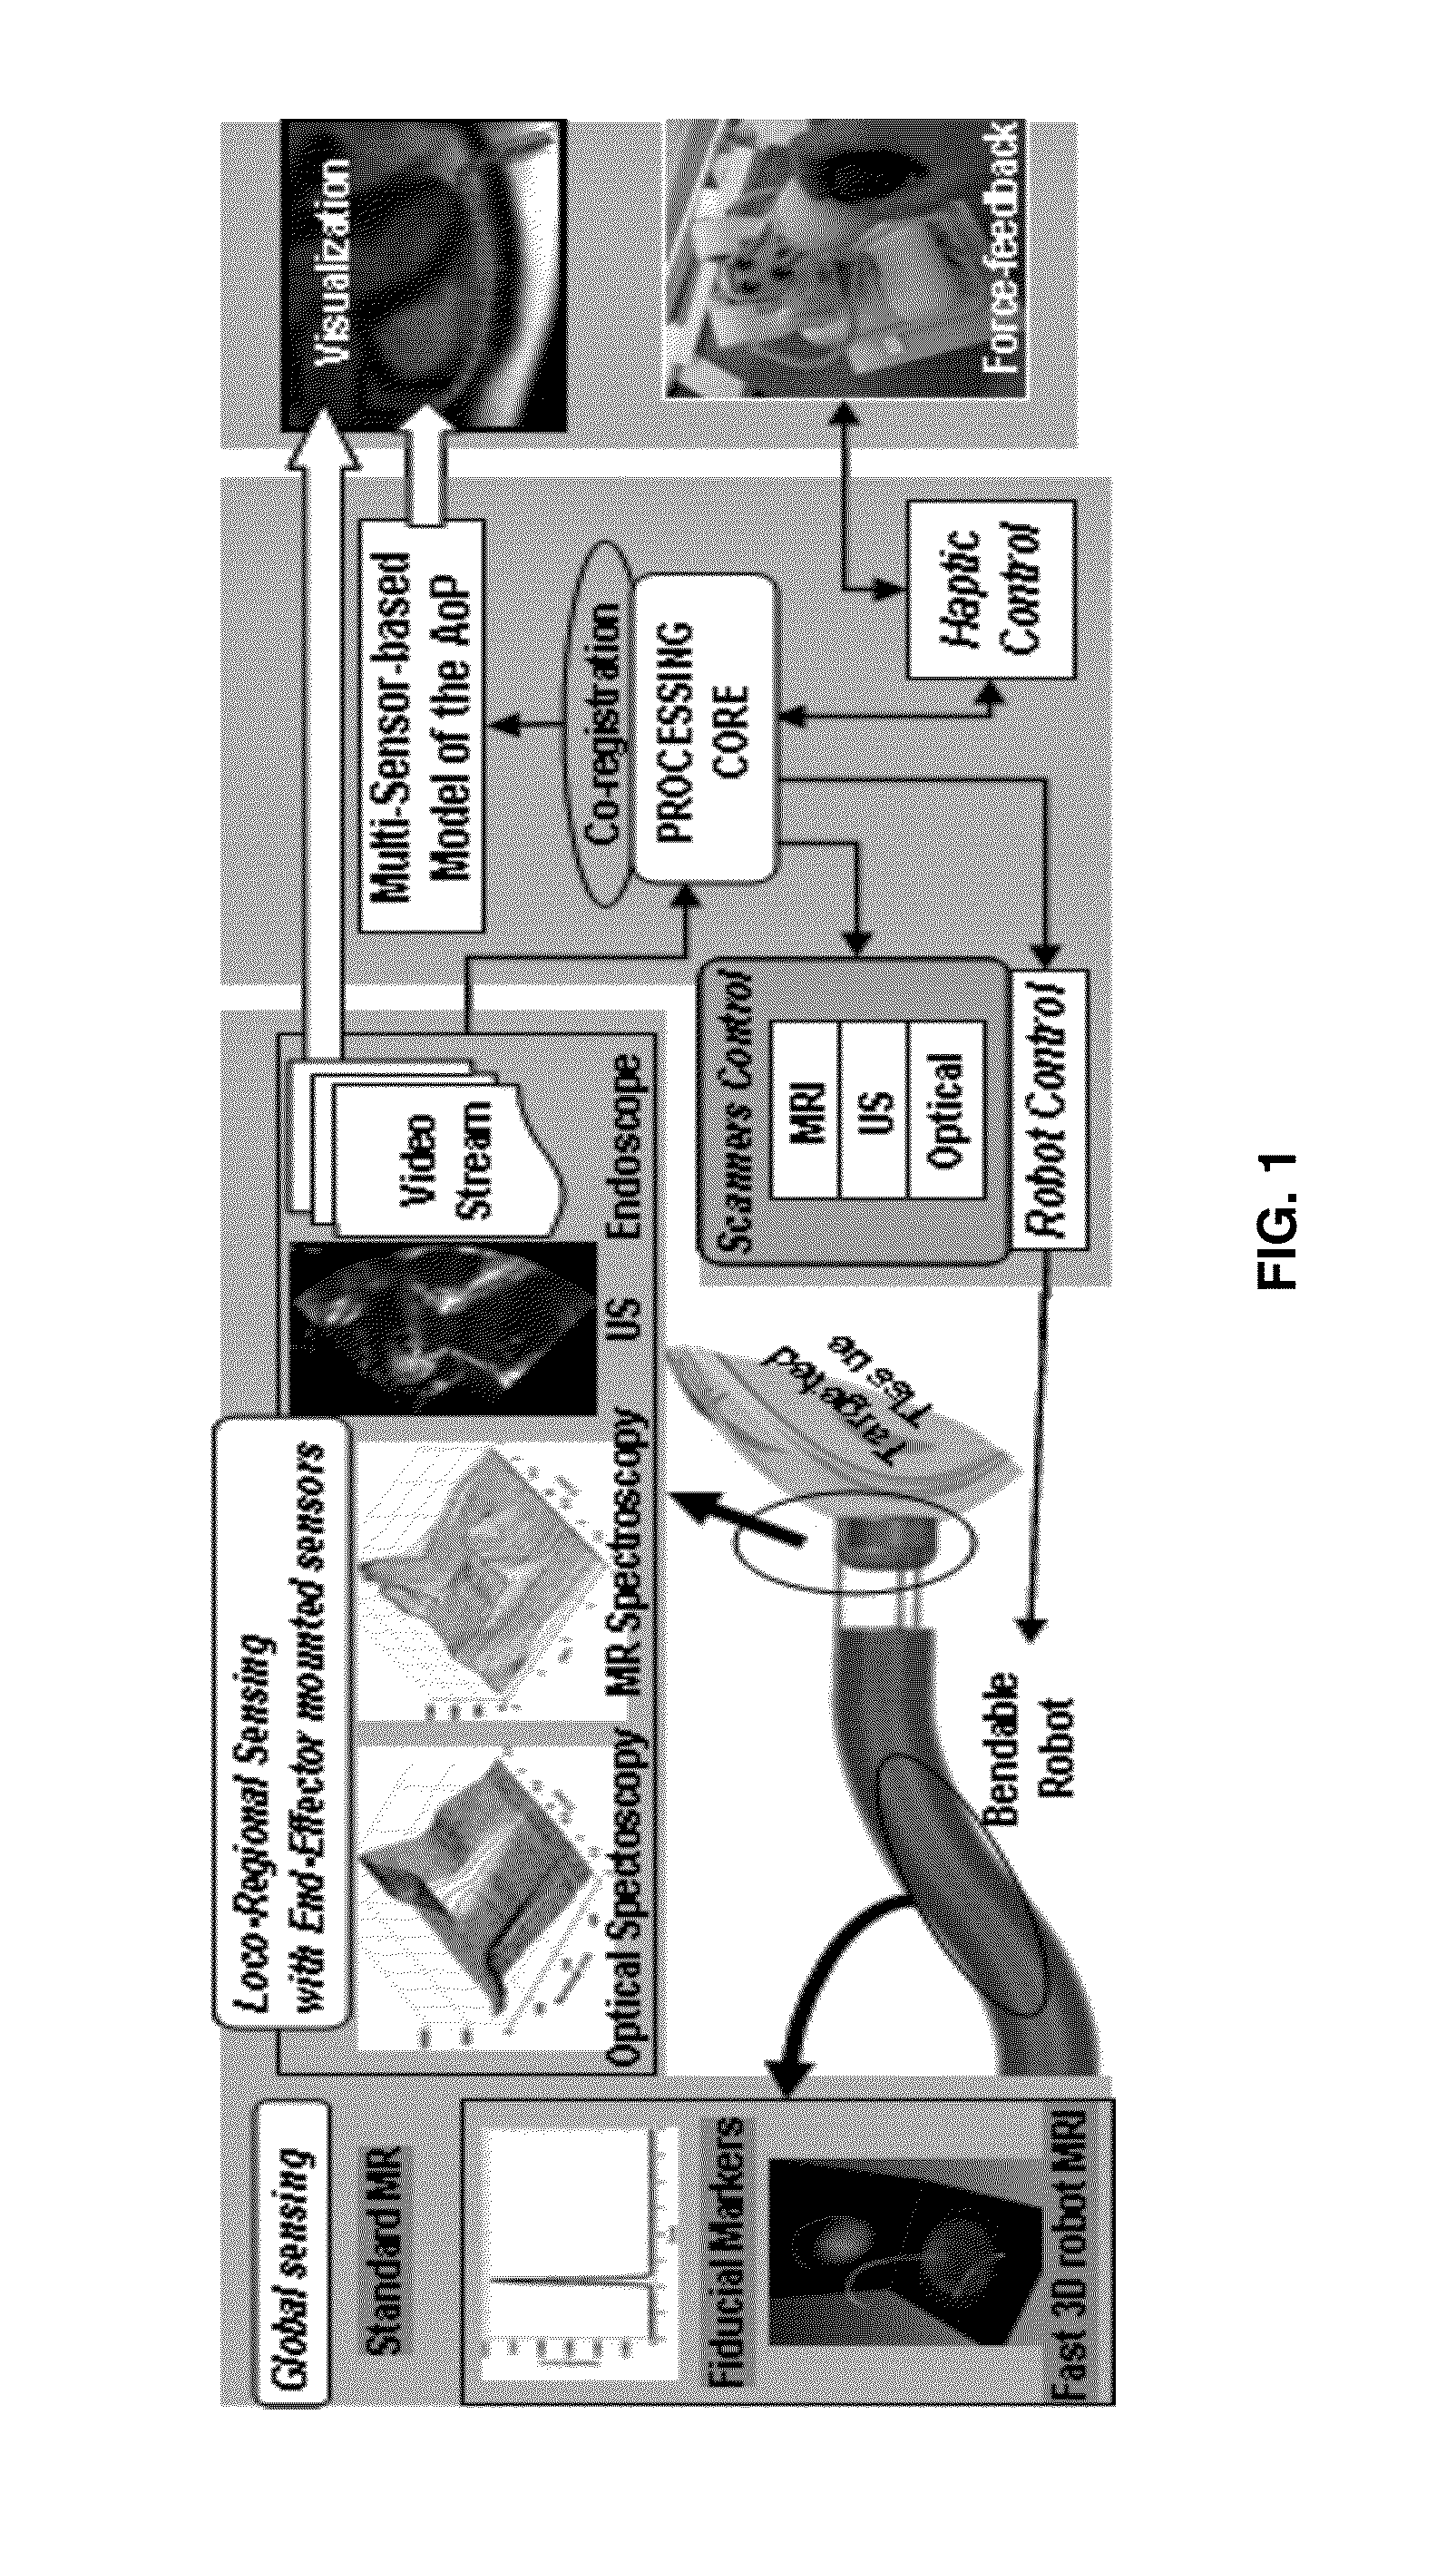 Robotic Device and System Software, Hardware and Methods of Use for Image-Guided and Robot-Assisted Surgery